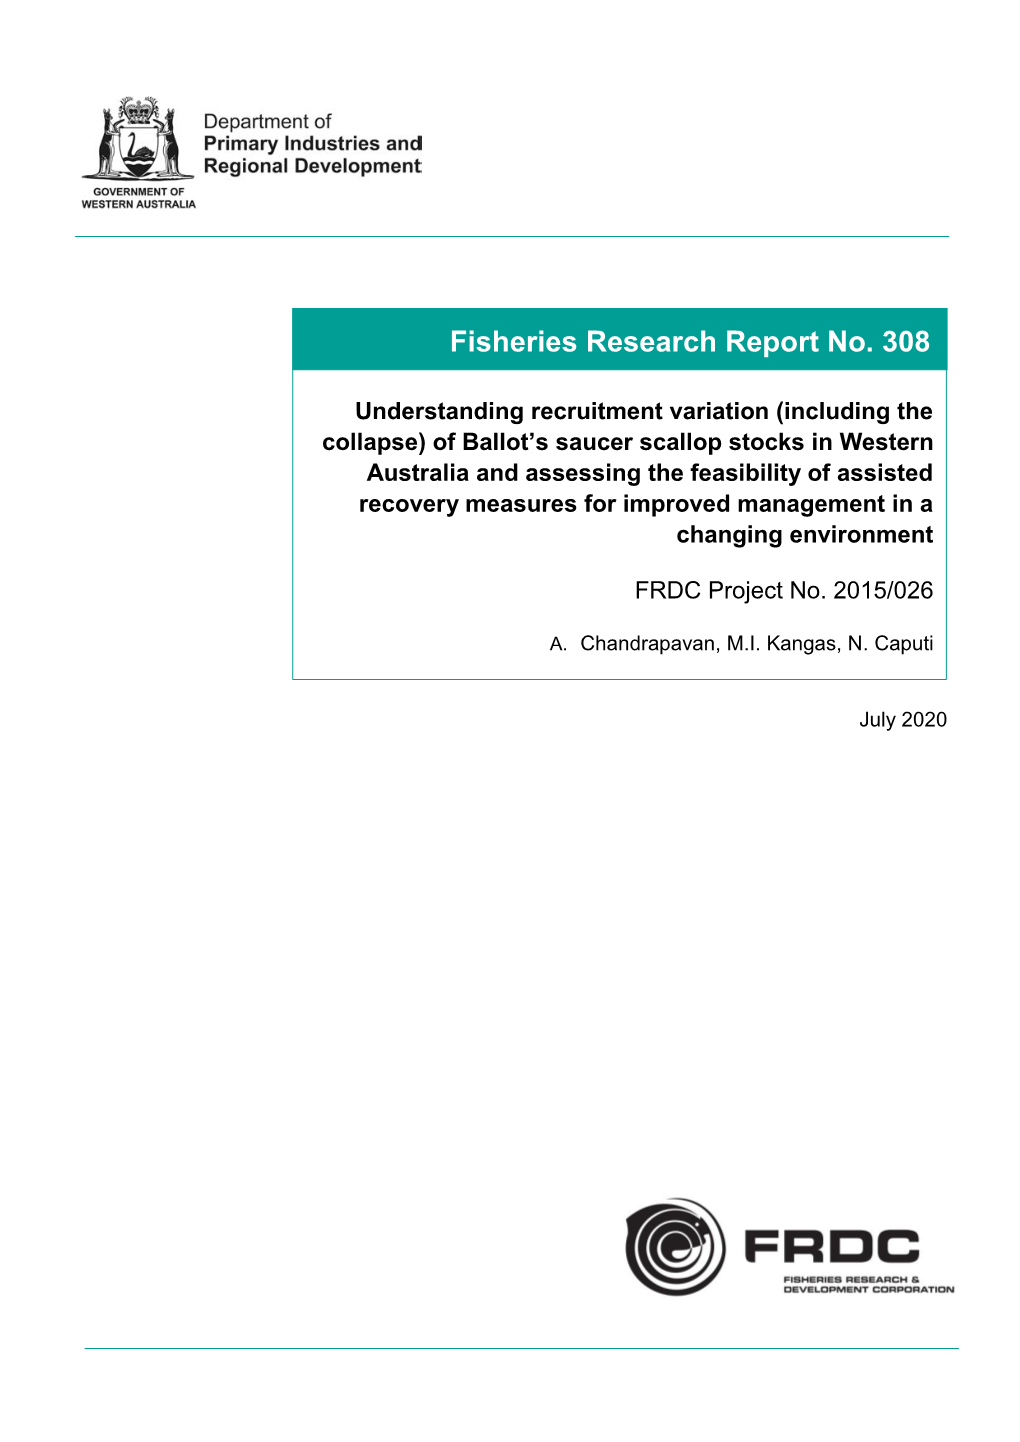 Fisheries Research Report No. 308 Fisheries Research Report No